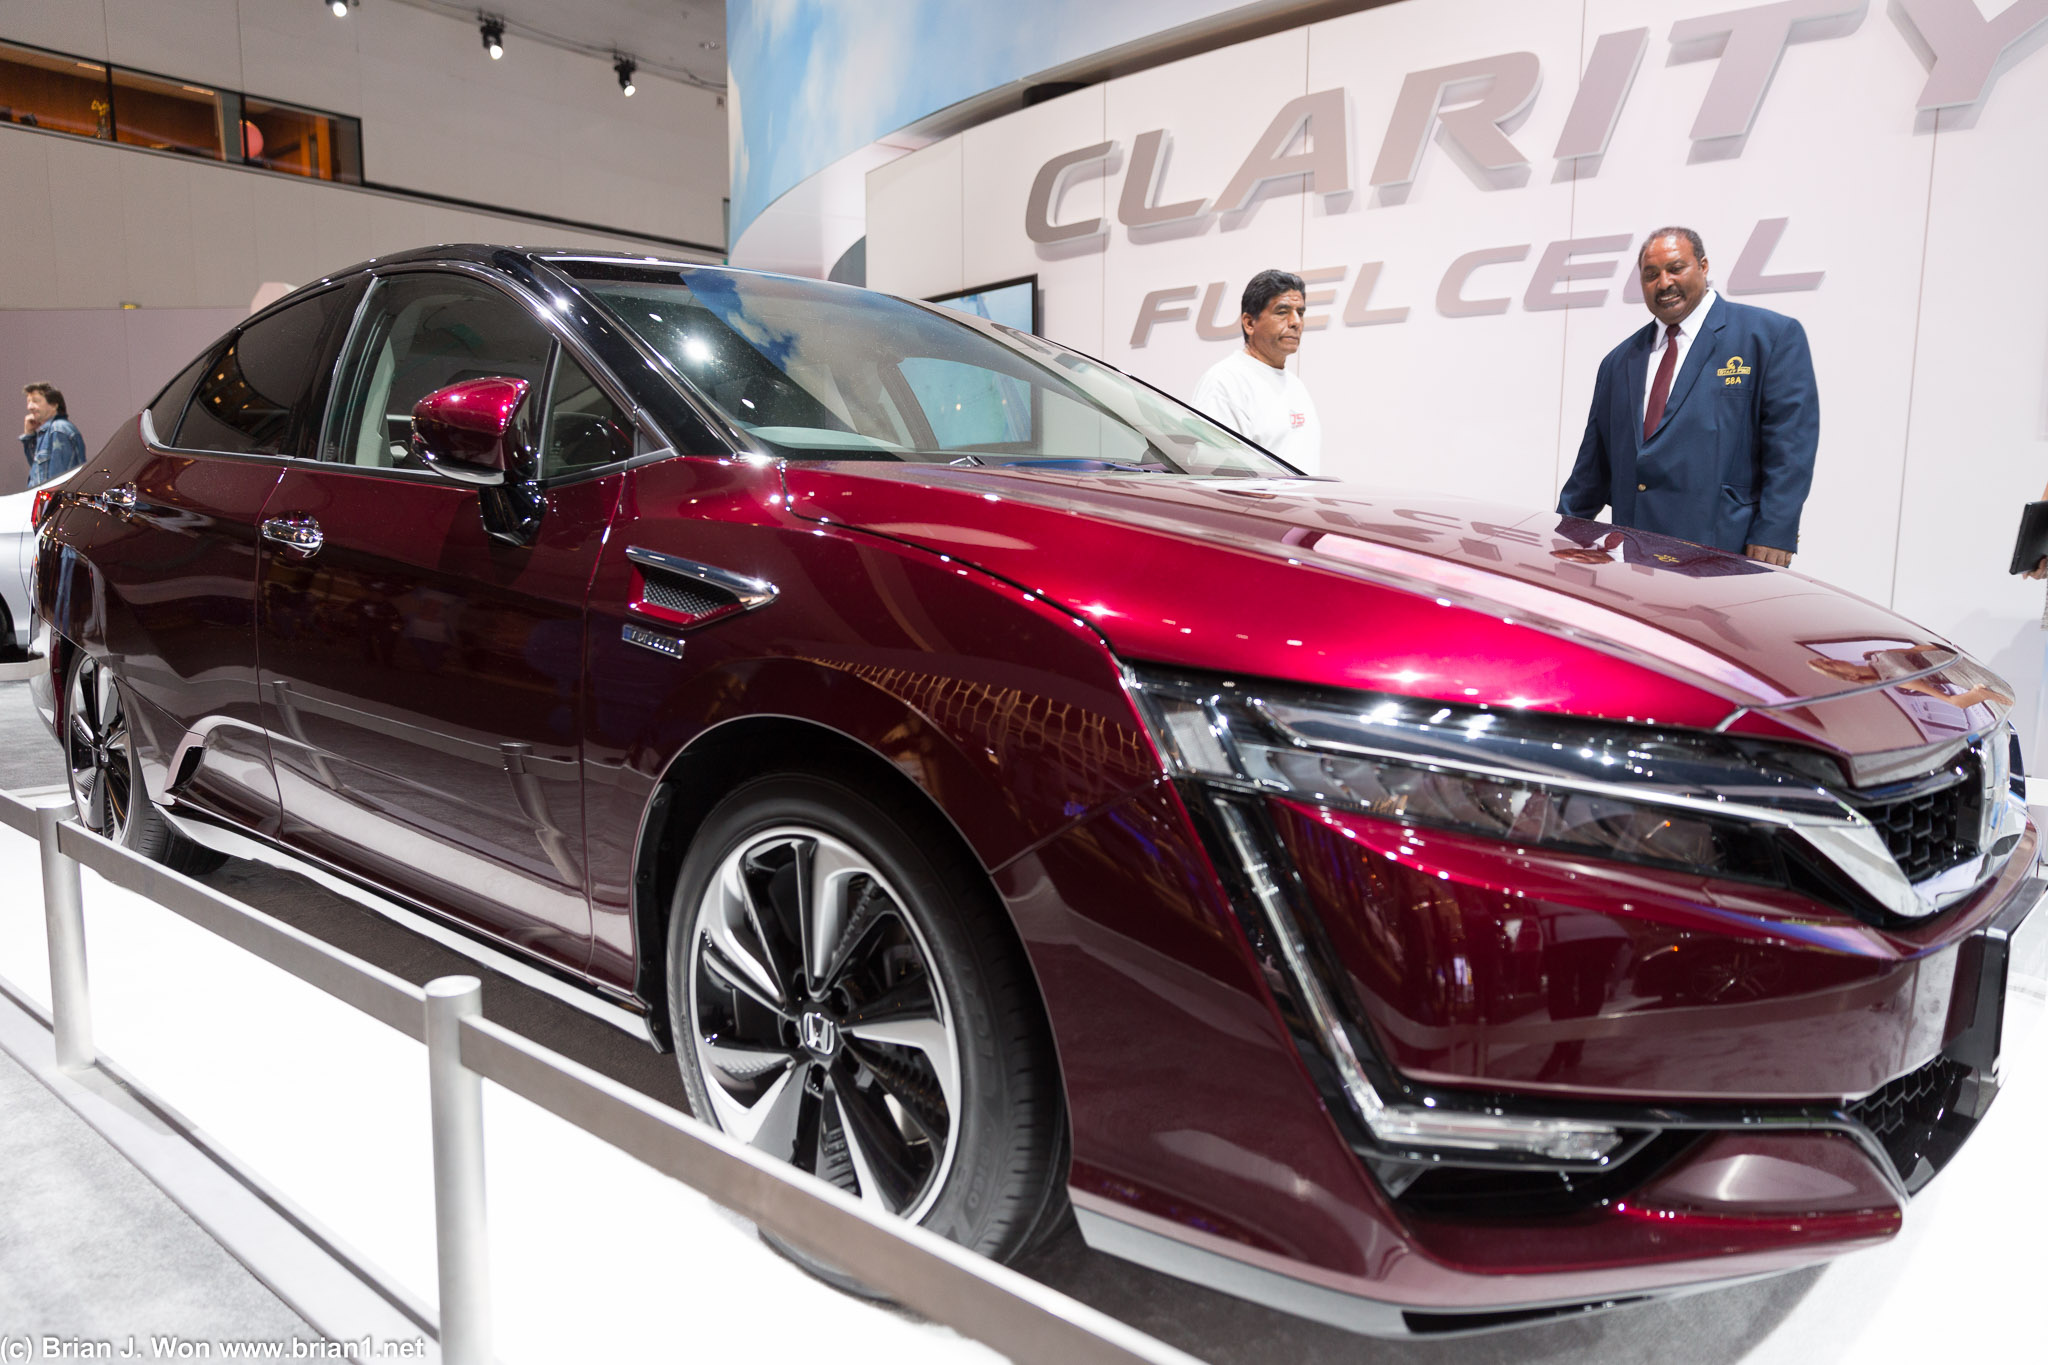 Honda Clarity. Fuel cell lives on.